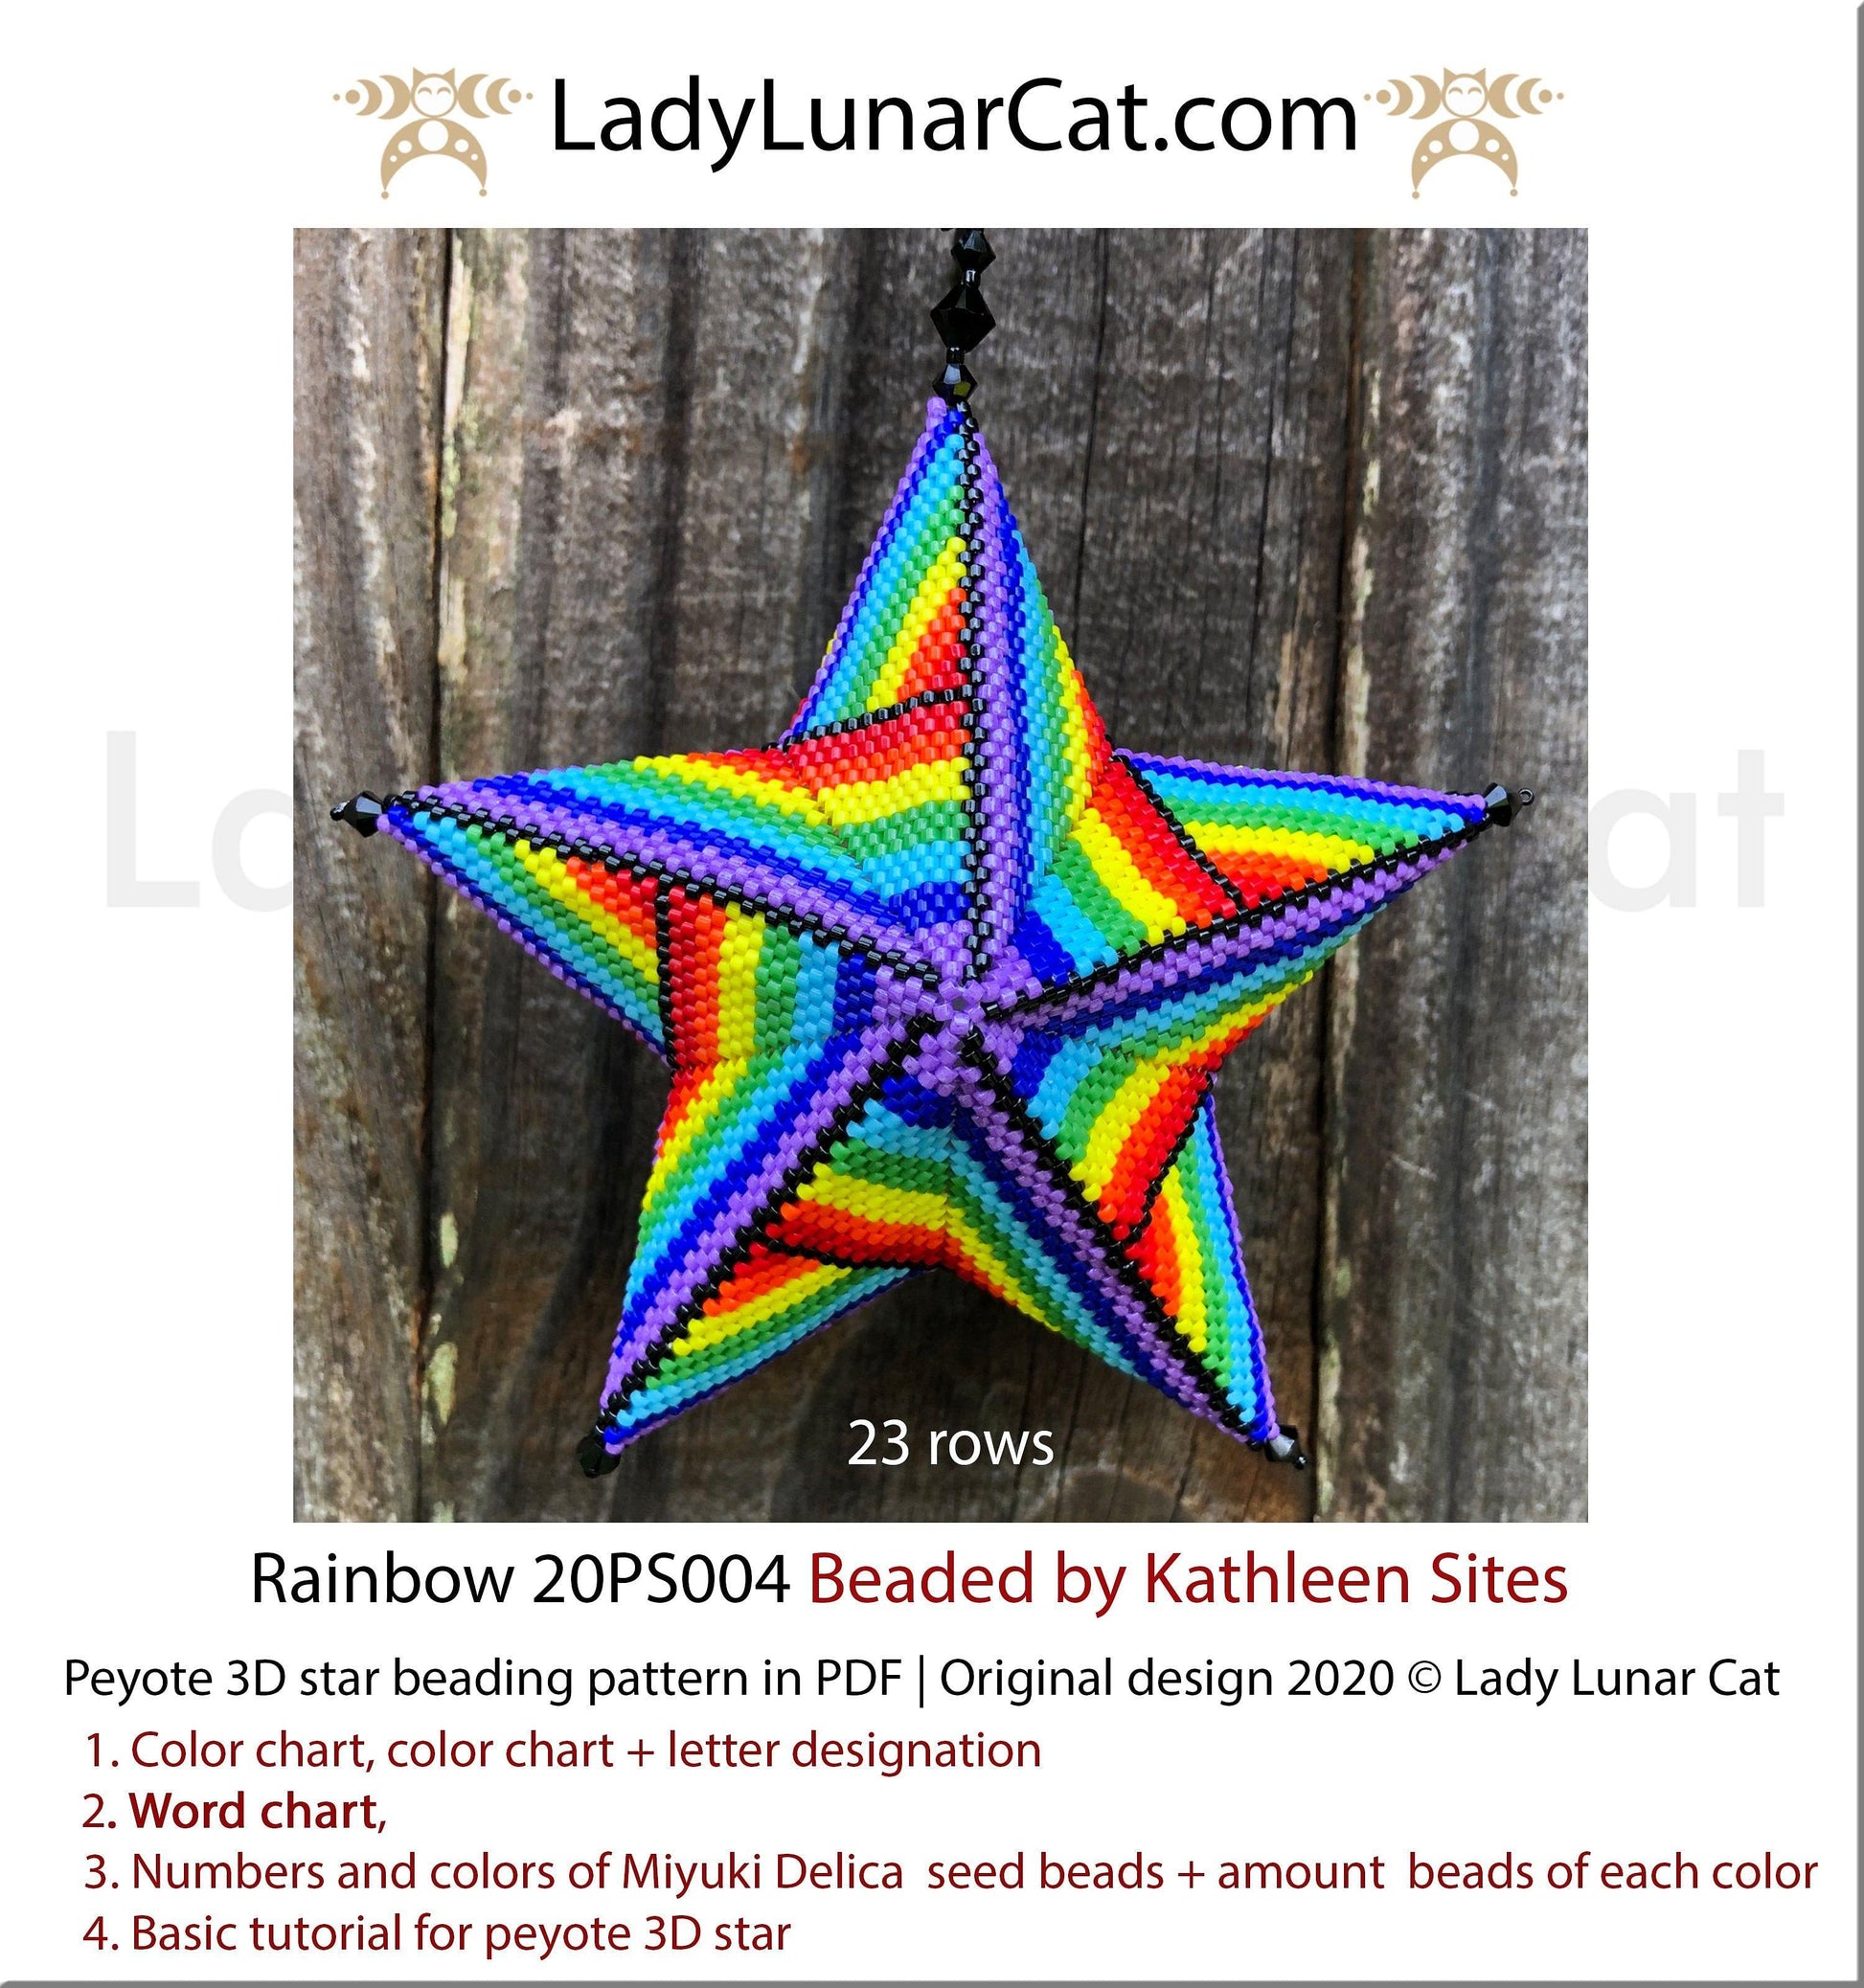 Peyote star patterns for beading colorful Rainbow 20PS004 LadyLunarCat